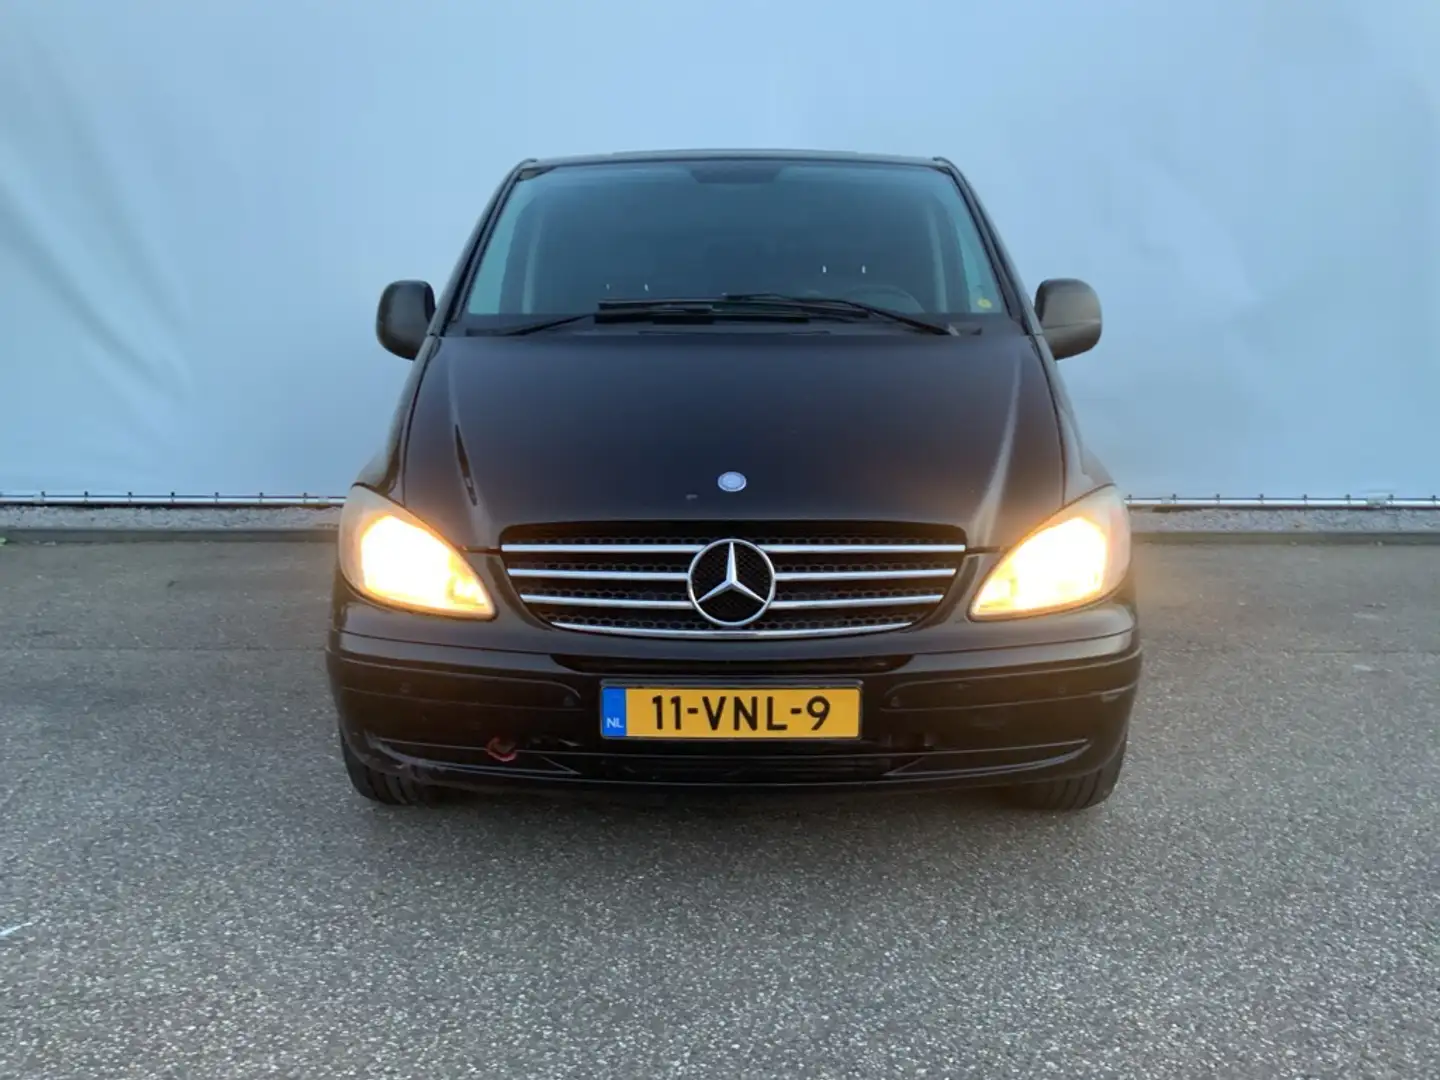 Mercedes-Benz Vito 120 CDI 343 DC luxe L3 Automaat Airco Cruise Leer Negro - 2